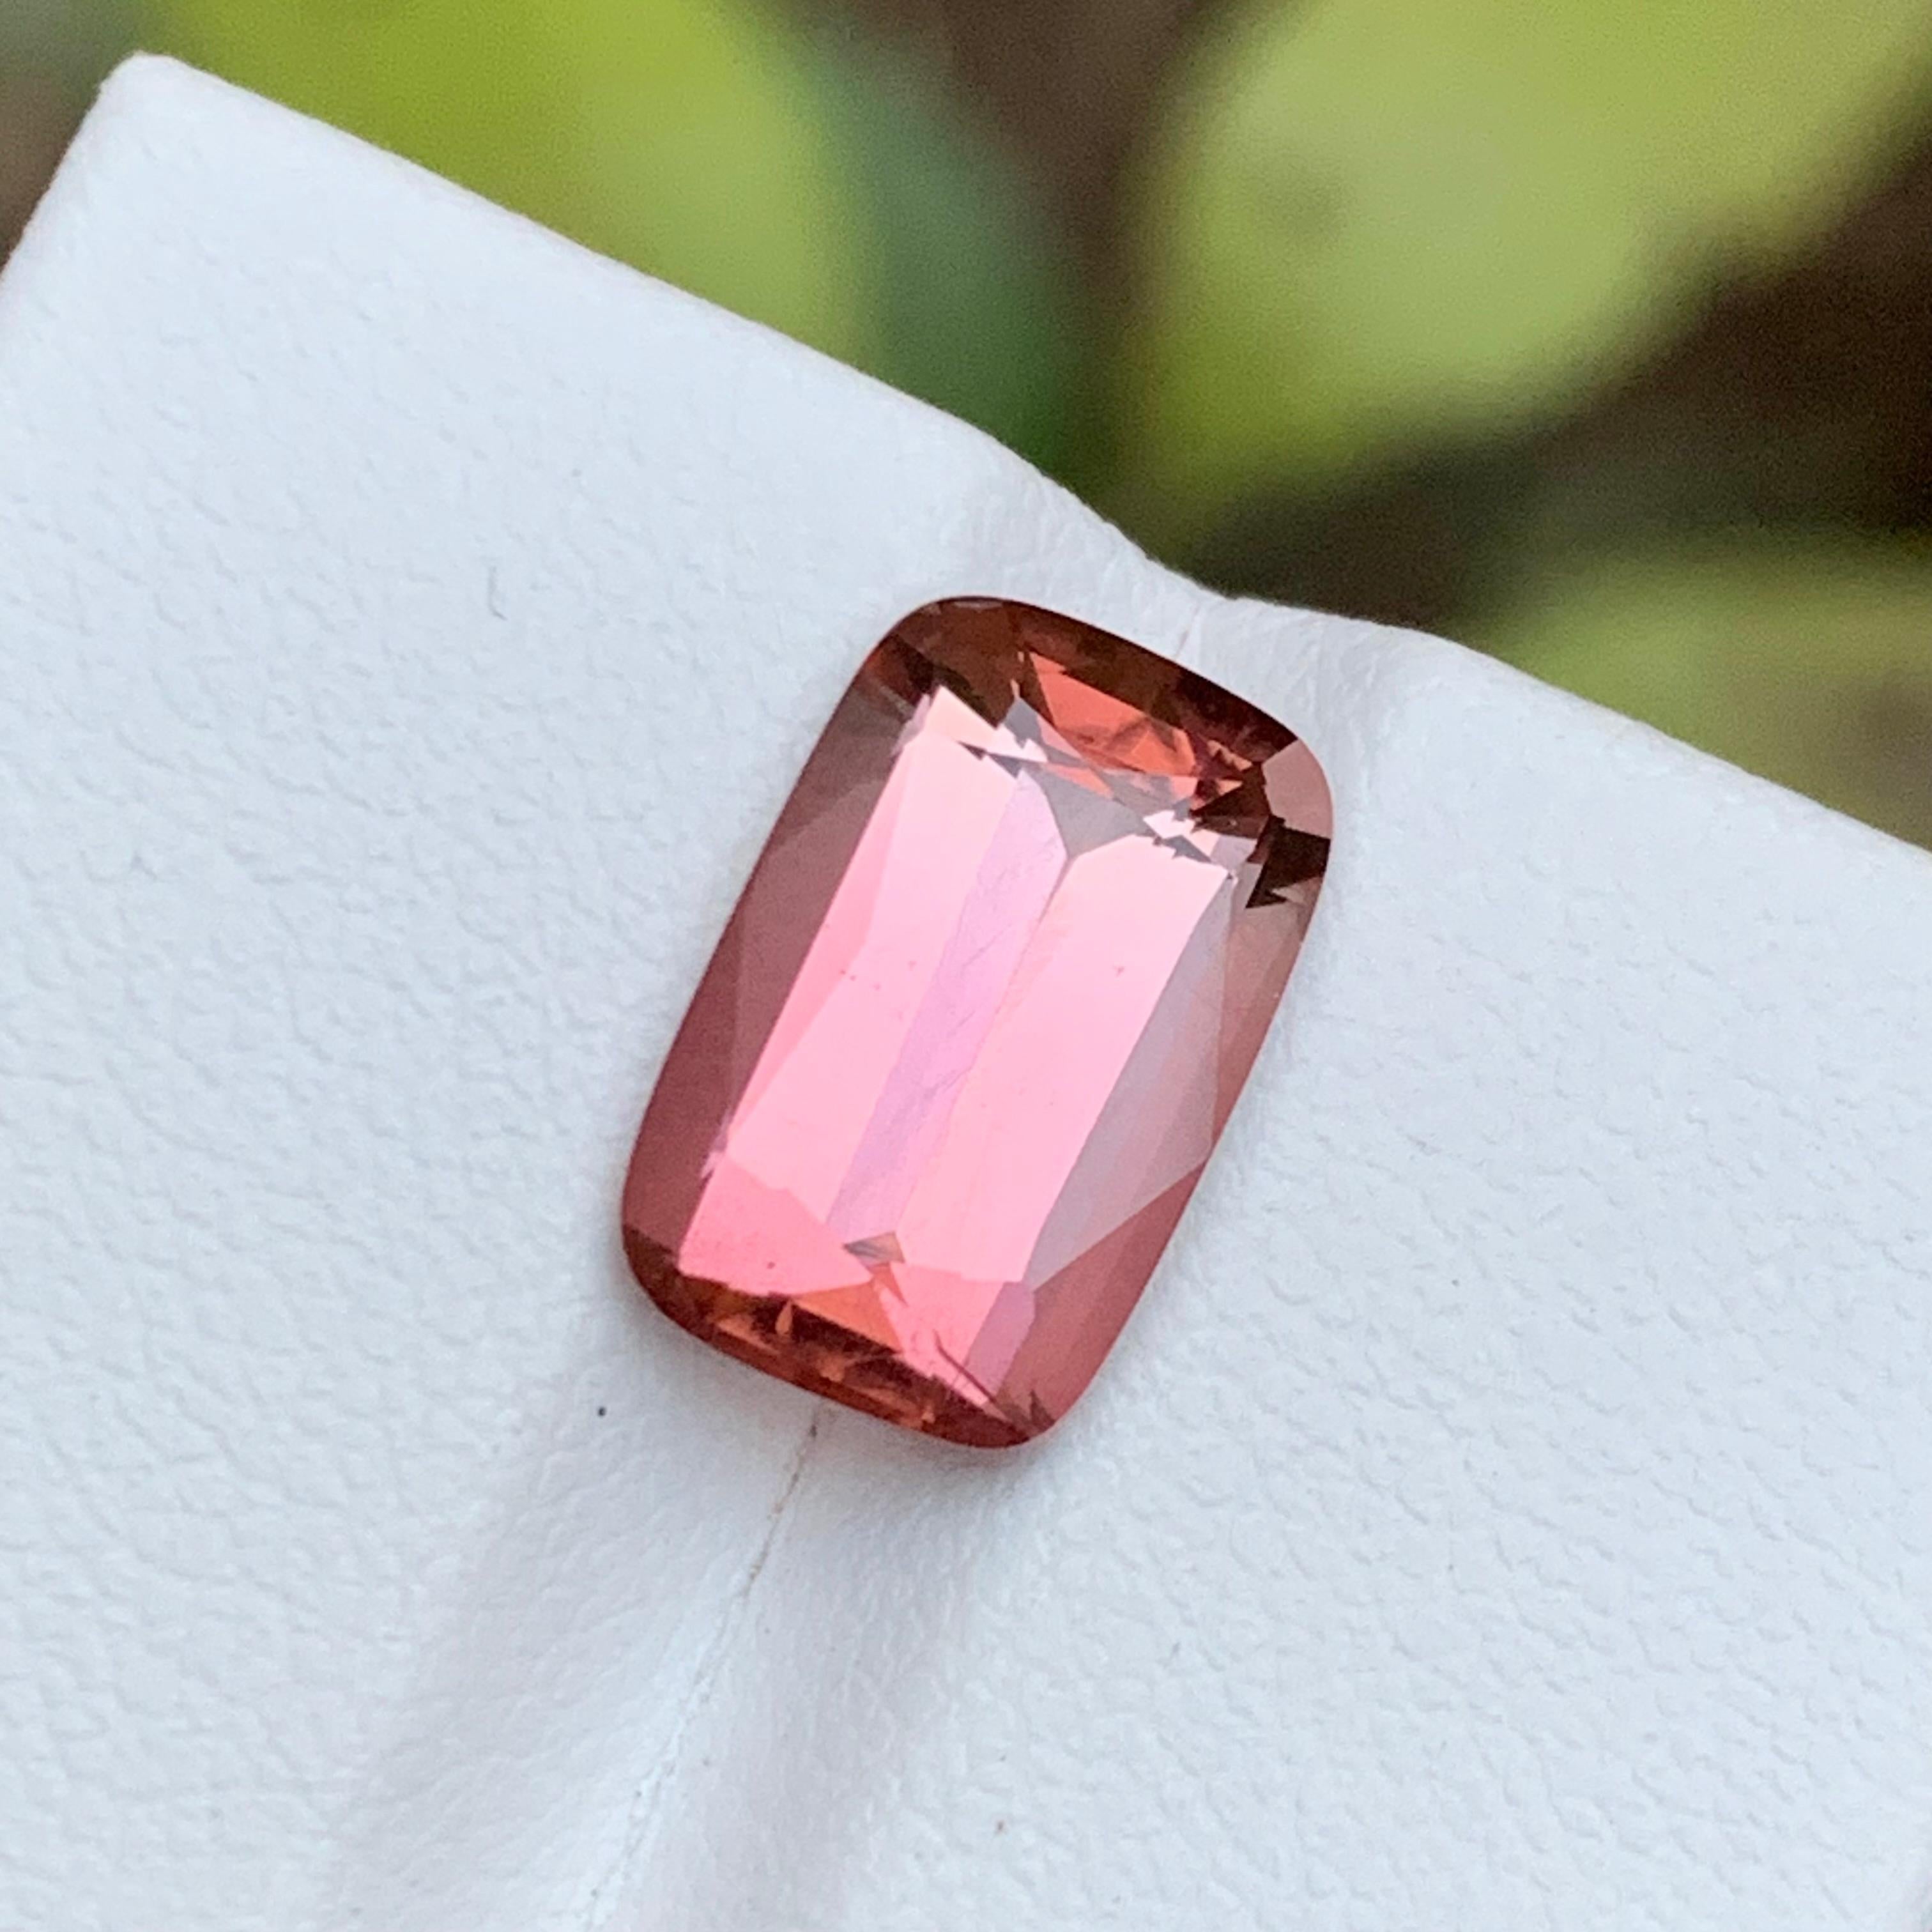 Rare Pink Natural Tourmaline Gemstone 4Ct Brilliant Cushion Cut for Ring/Pendant For Sale 3